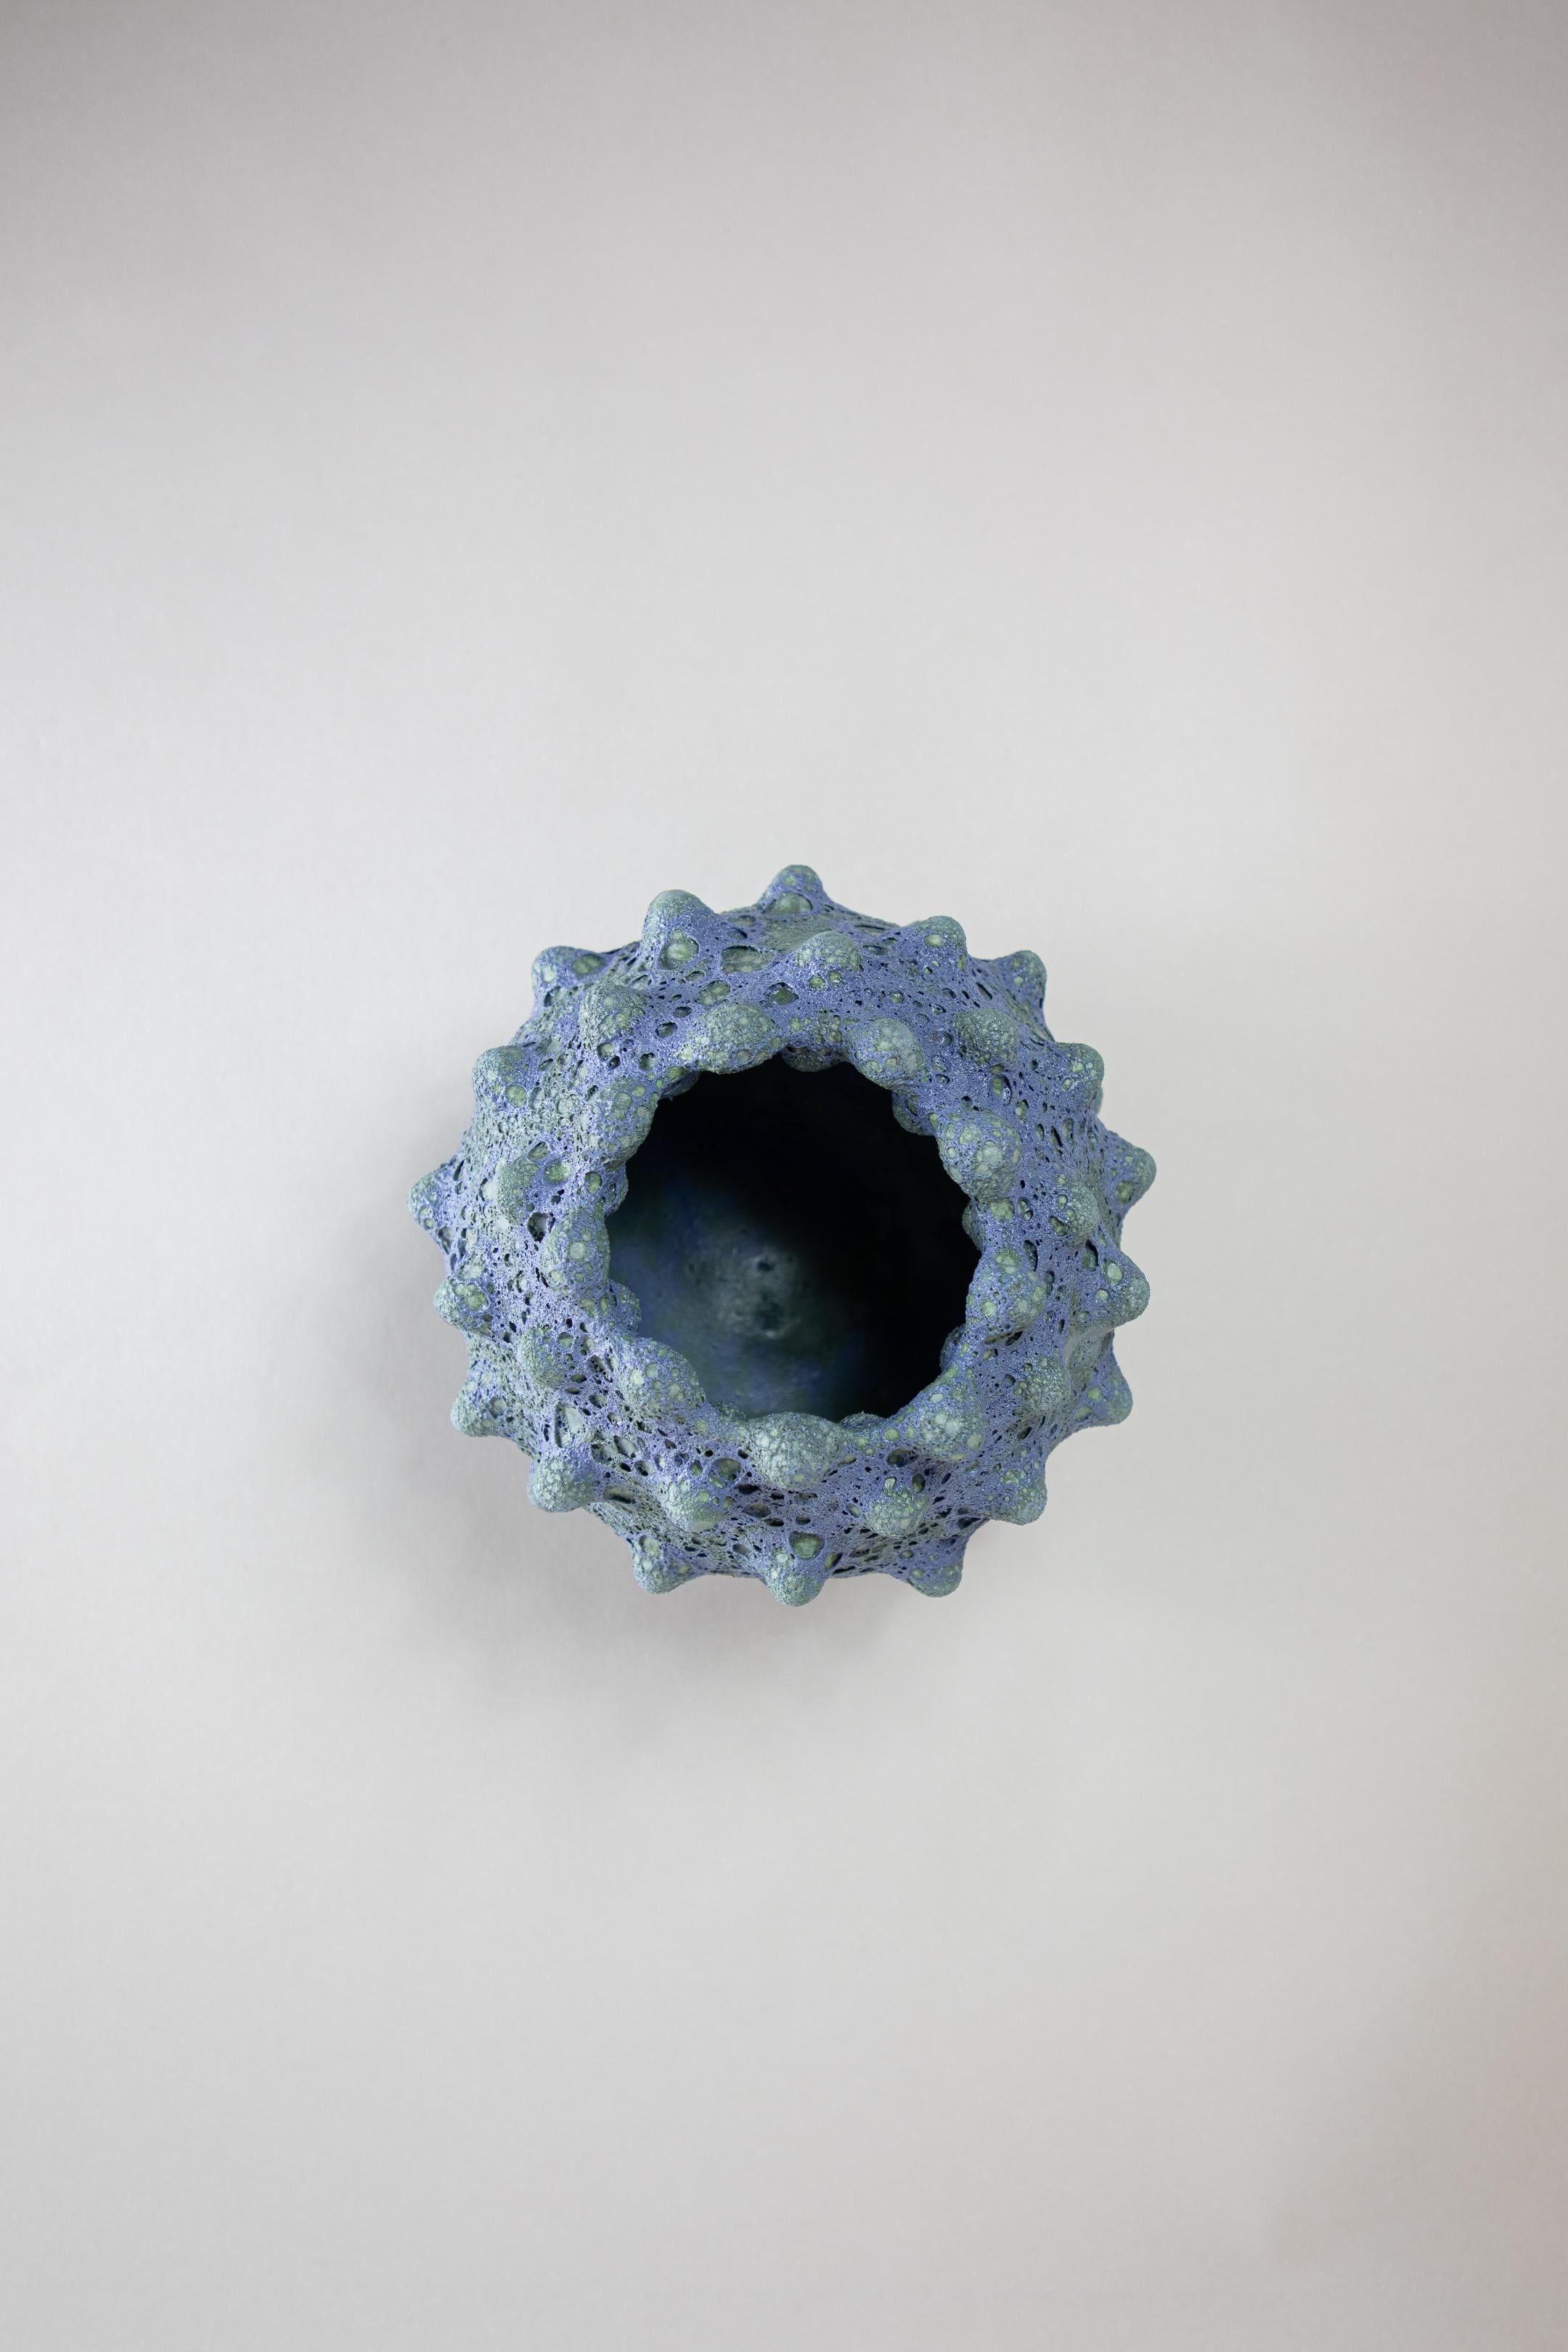 Object 3 Atlantis Collection by Angeliki Stamatakou
One of a kind, 2022
Dimensions: H15 x W17 cm.
Materials: Stoneware, handmade glaze.
Colors: blue, pink, ivory.

Angeliki Stamatakou is a ceramics artist based in Athens, Greece. She studied